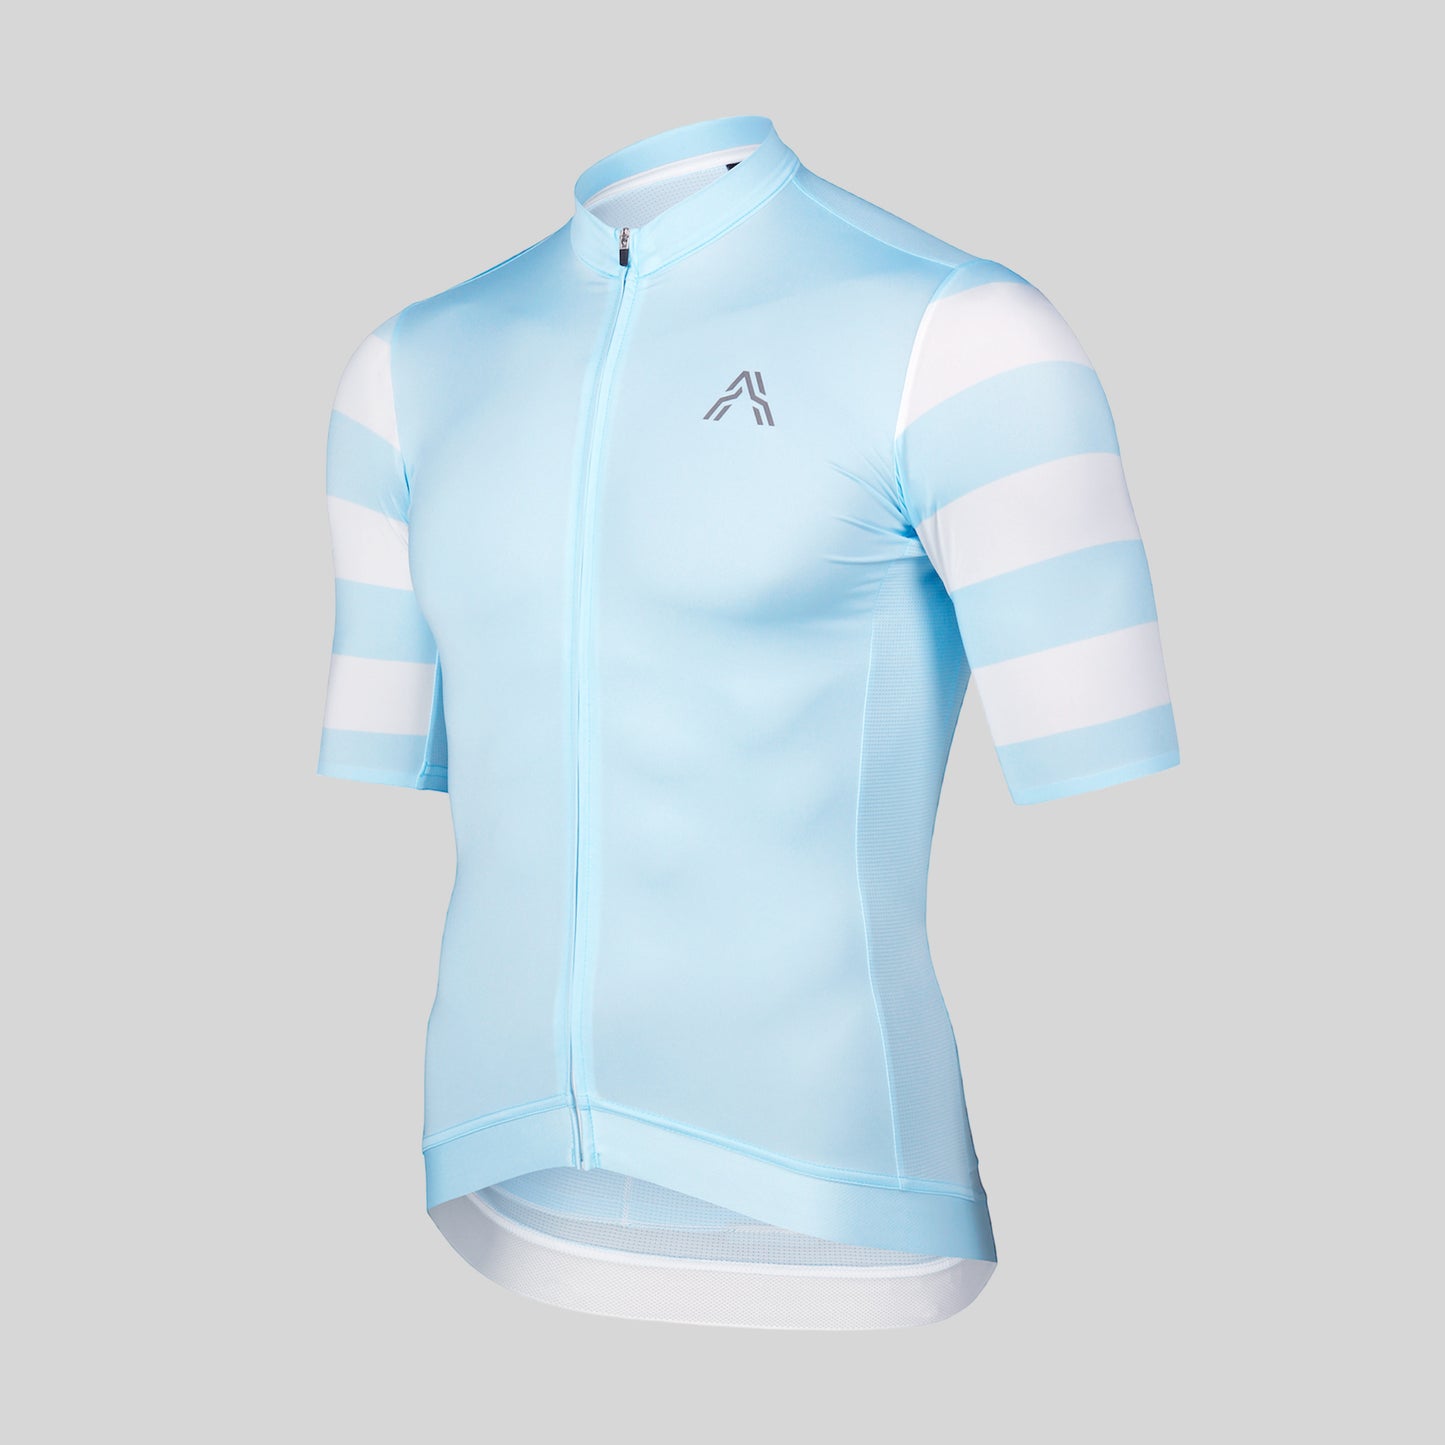 The retro-inspired Astro jersey Sky Blue from Ascender Cycling Club Switzerland Frontside View